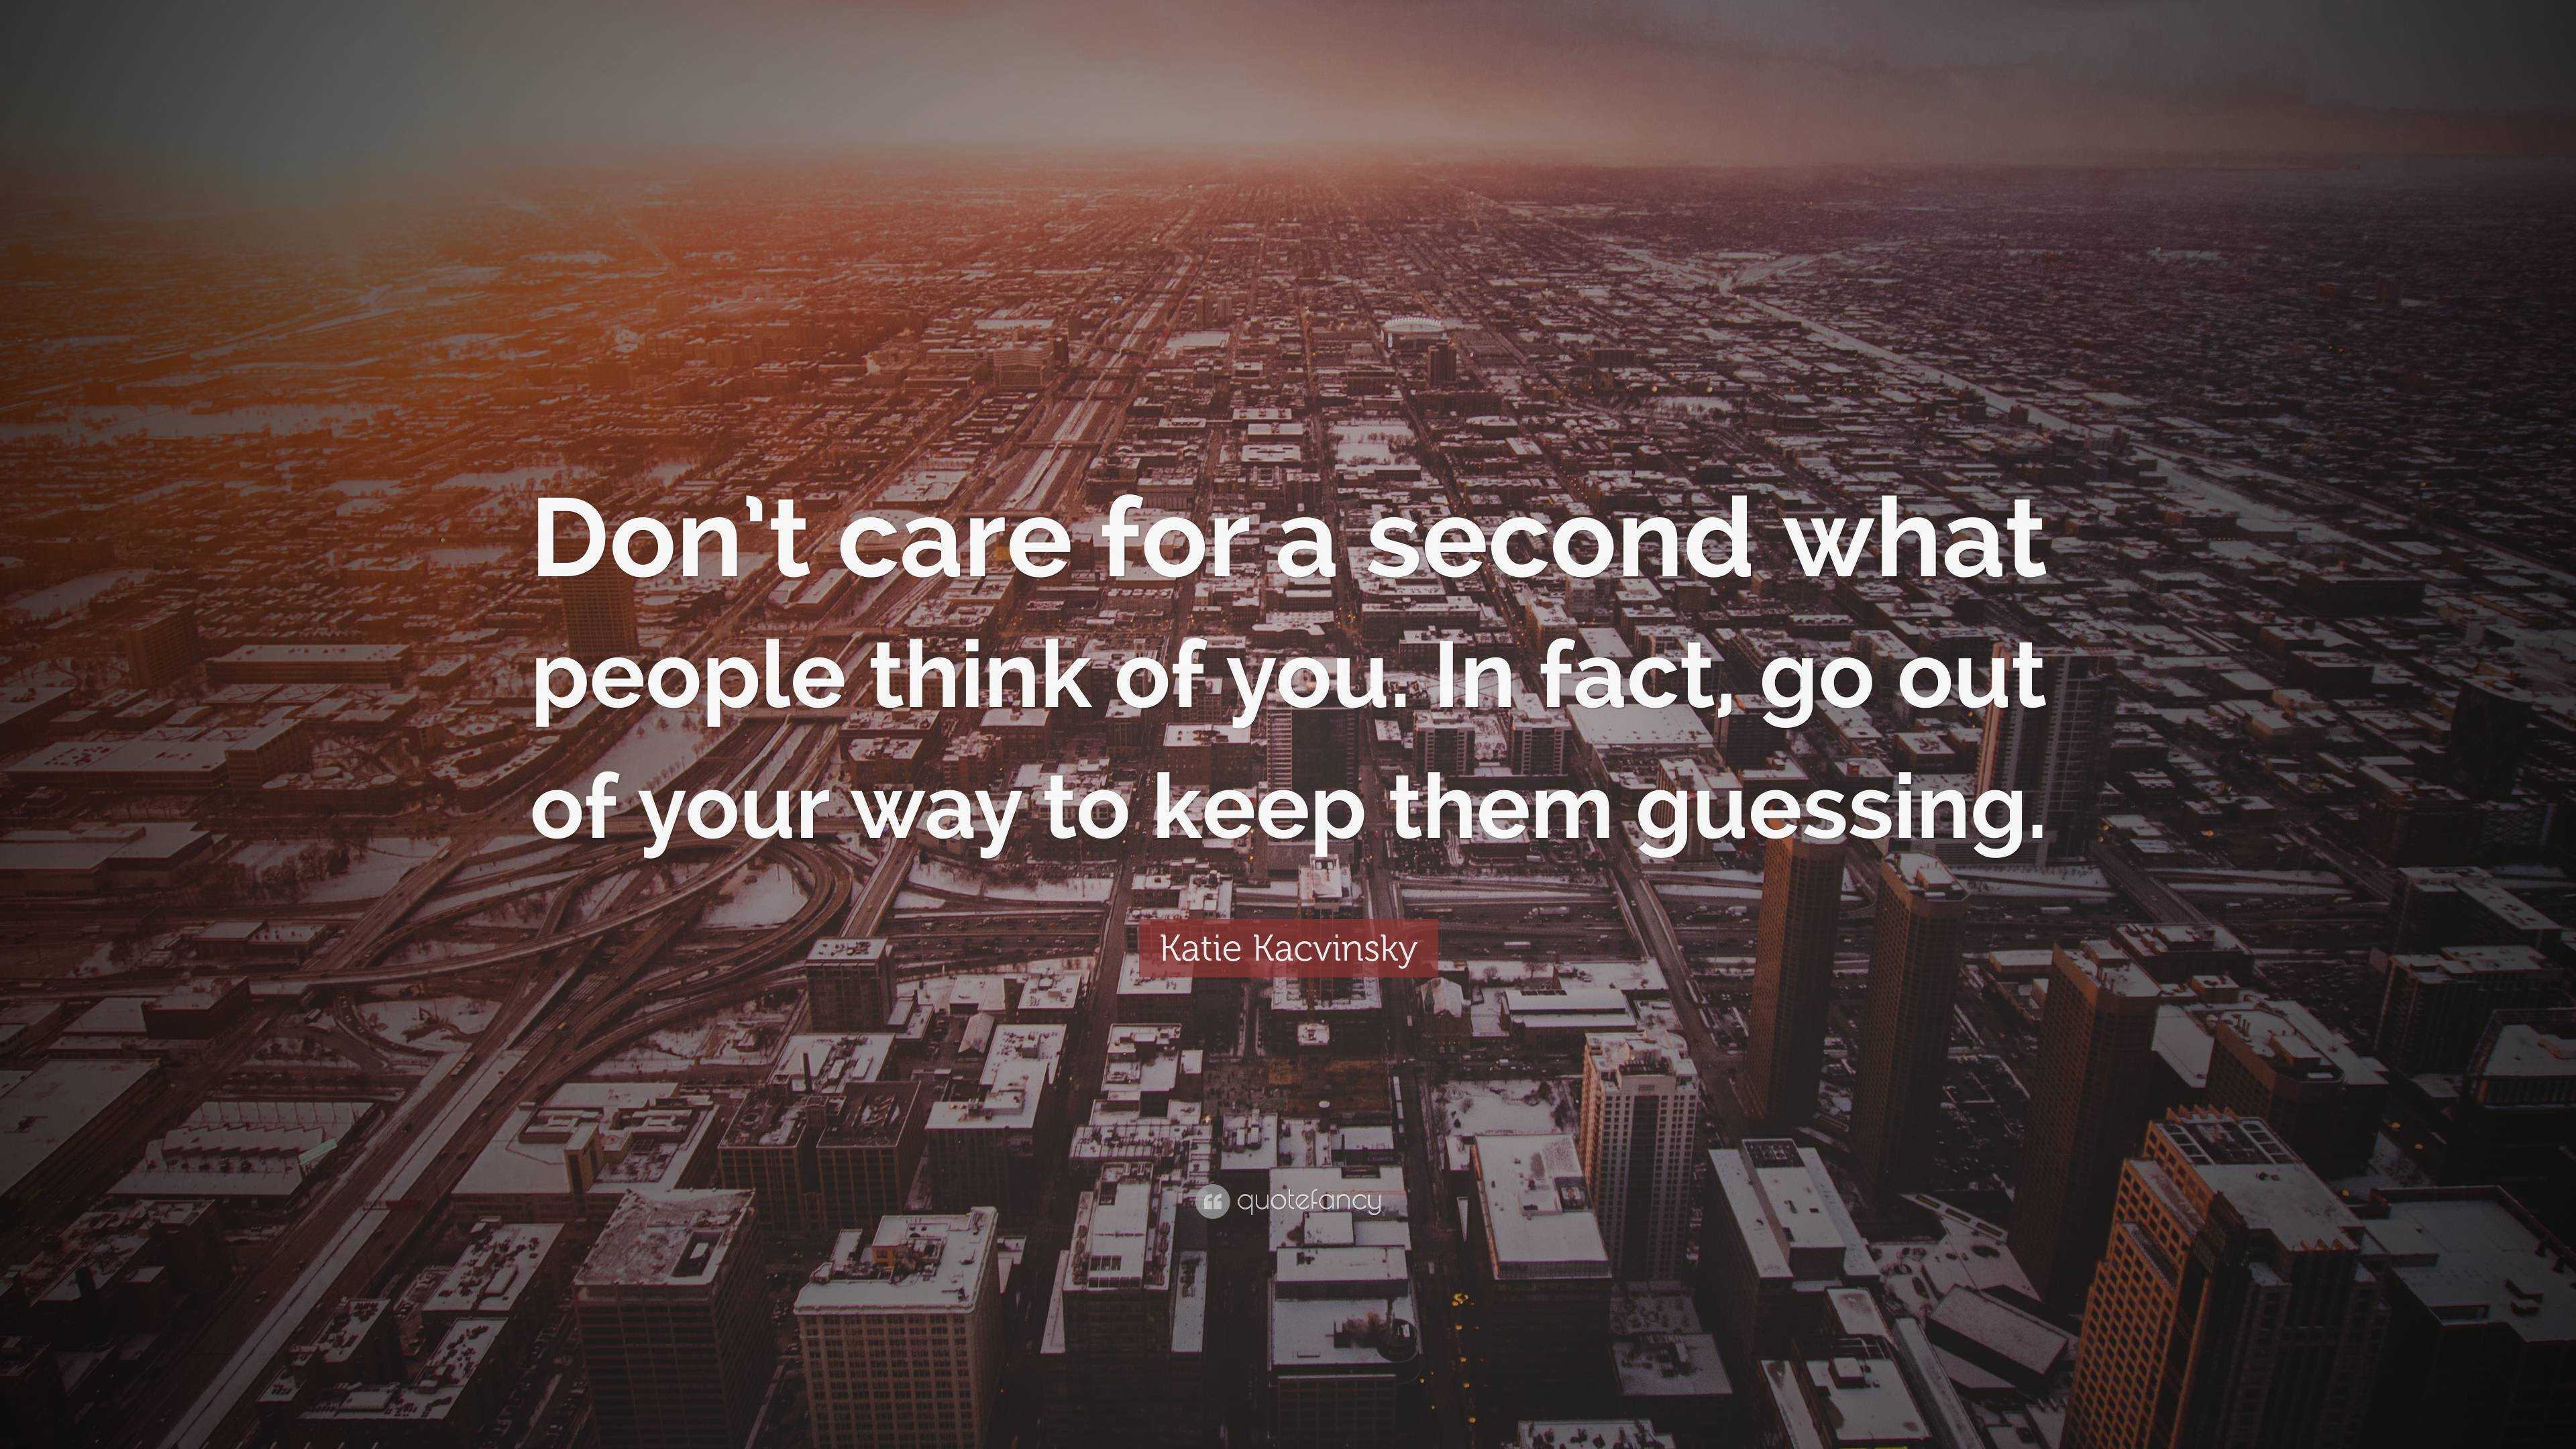 Katie Kacvinsky Quote: “Don’t care for a second what people think of ...